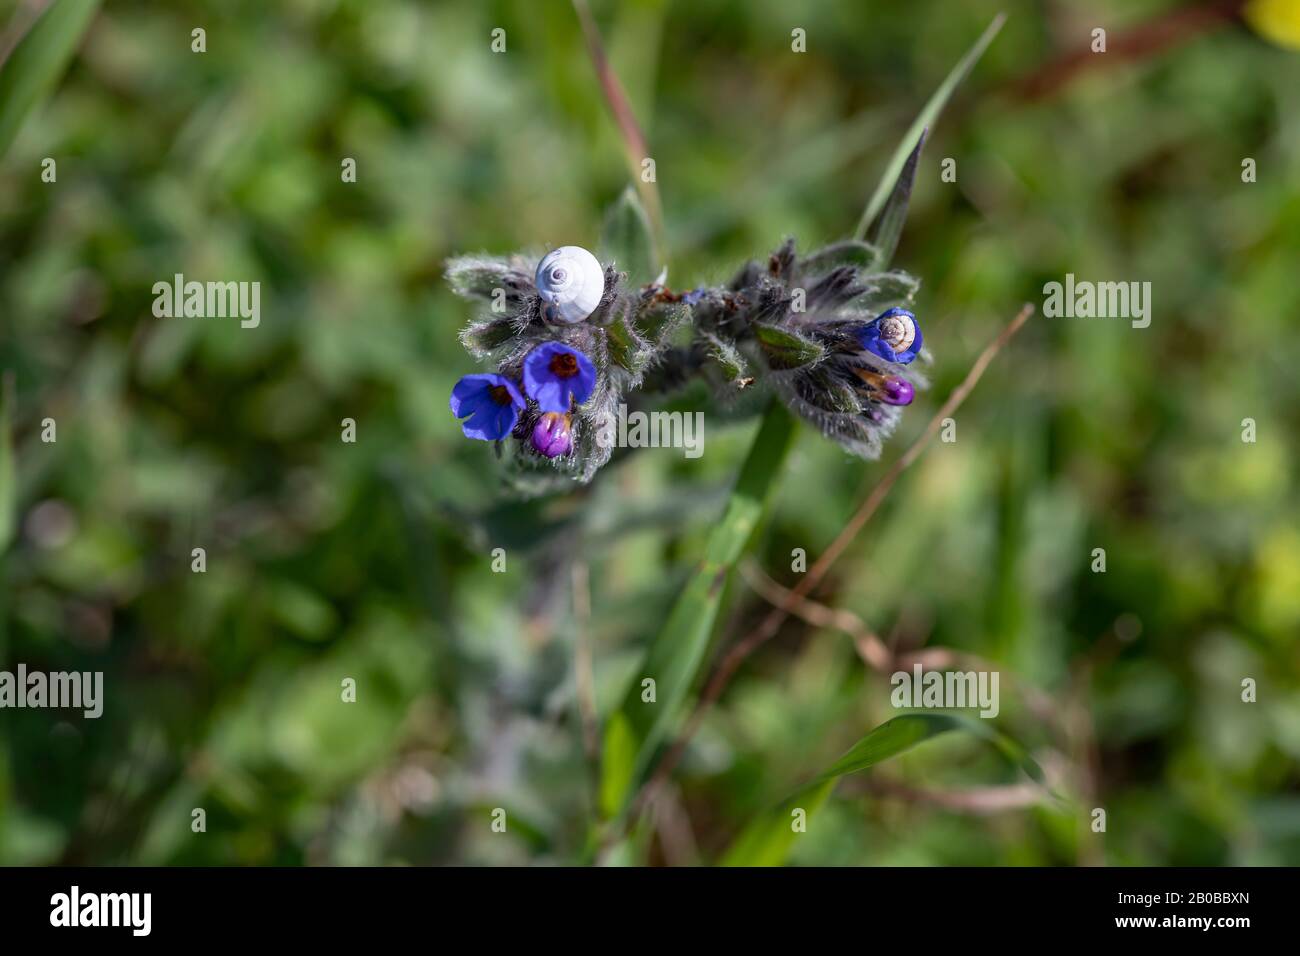 Blue flowers and buds of Lungwort Pulmonaria with white snails close-up on a blurred green background Stock Photo